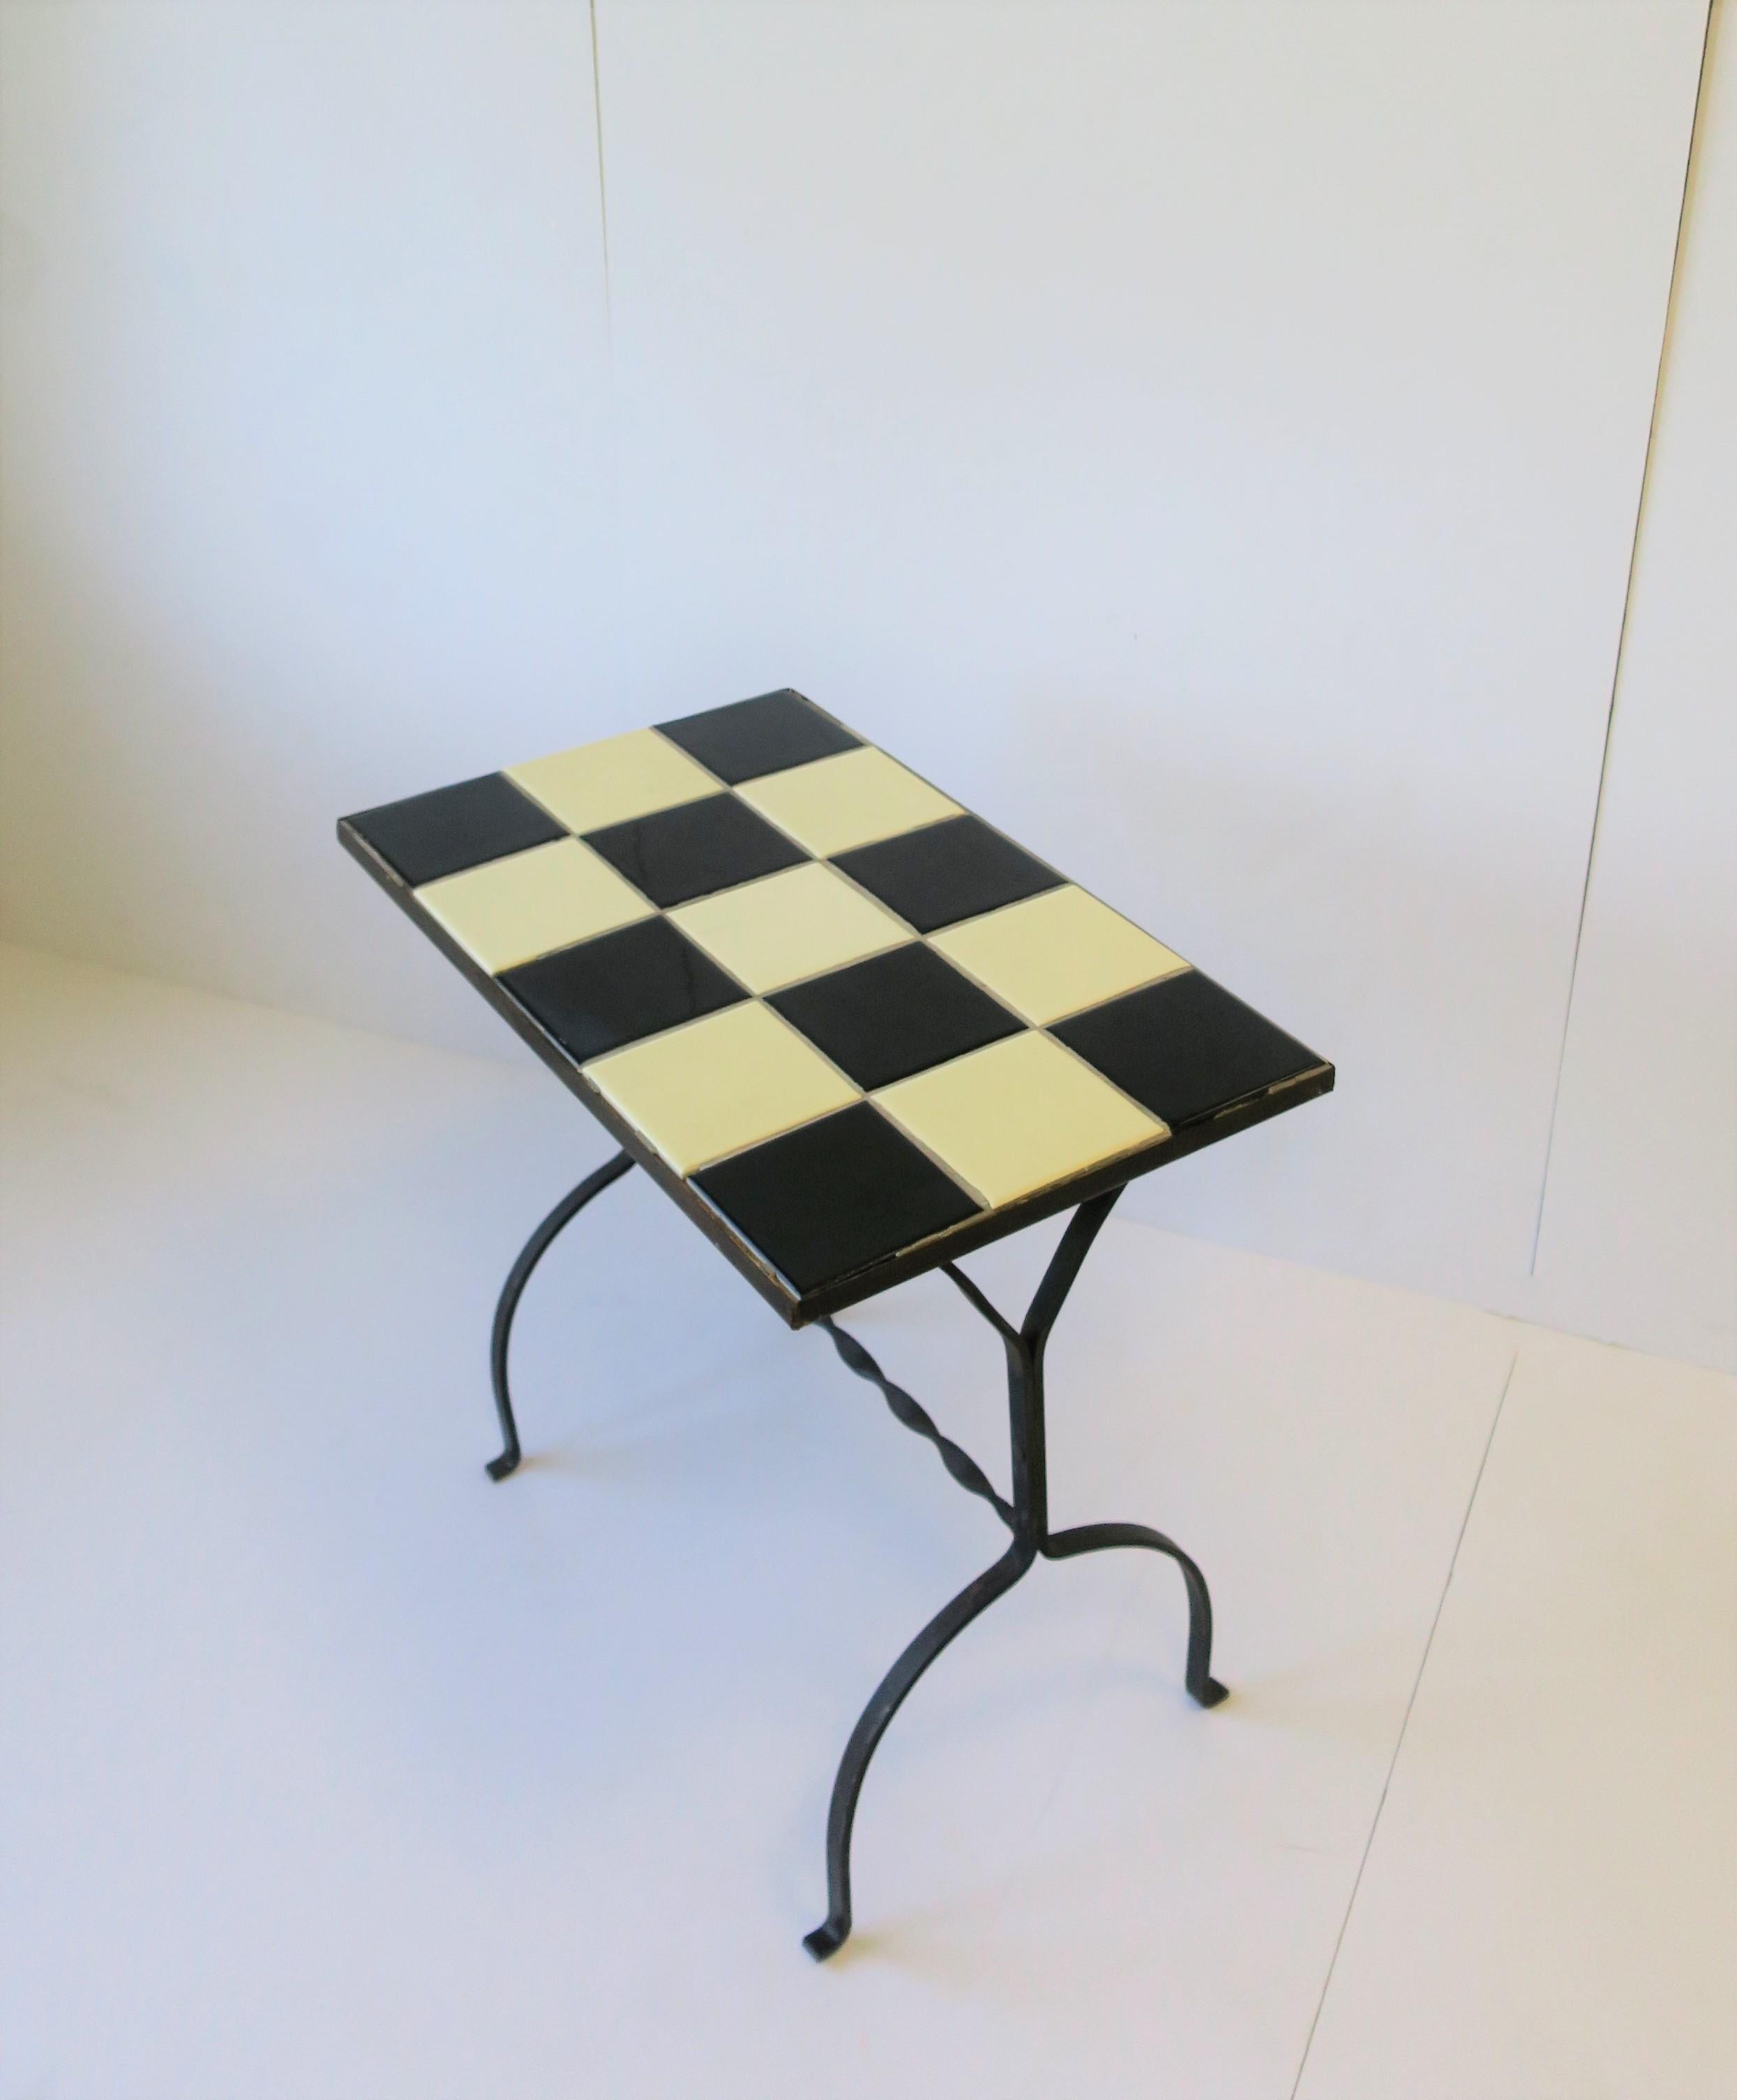 American Mid-Century Modern Black and White Mosaic Tile Side or End Table